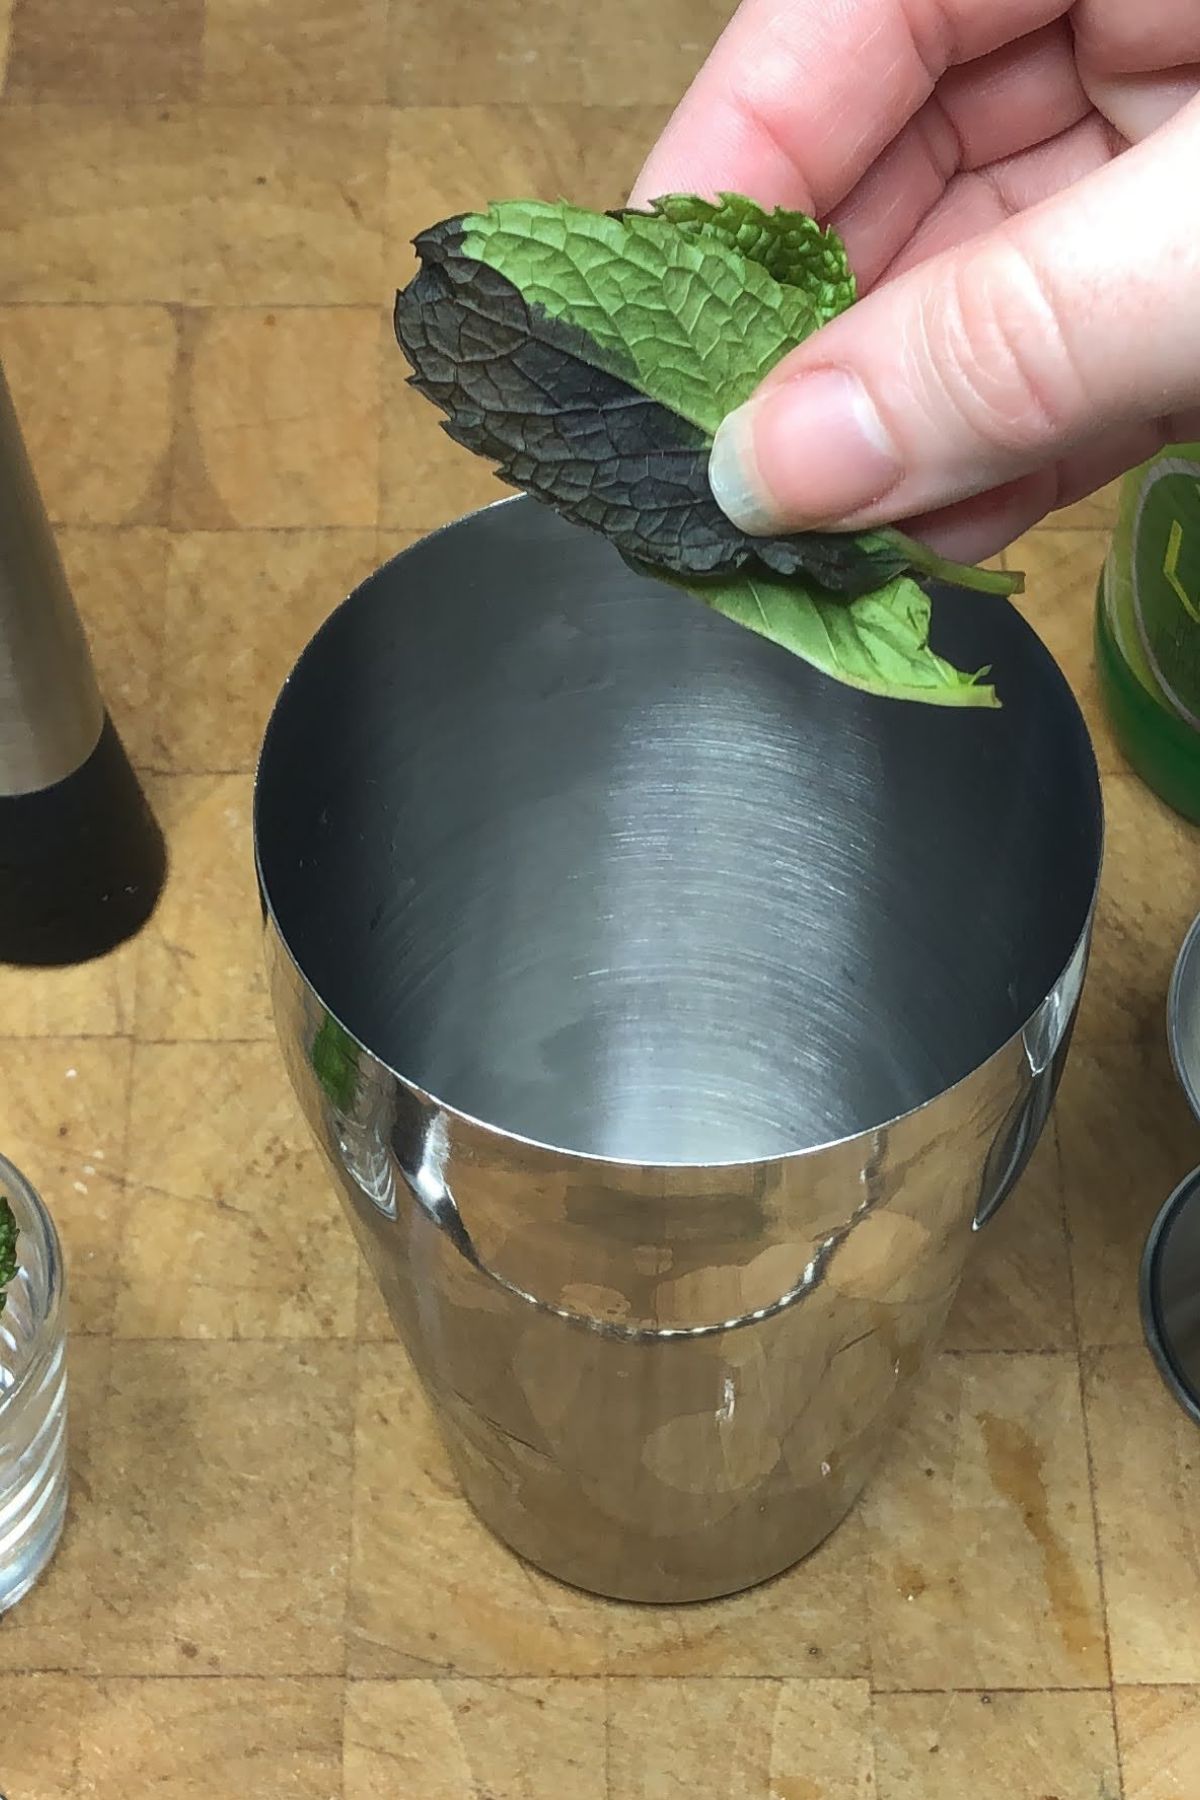 Adding mint leaves into a shaker.